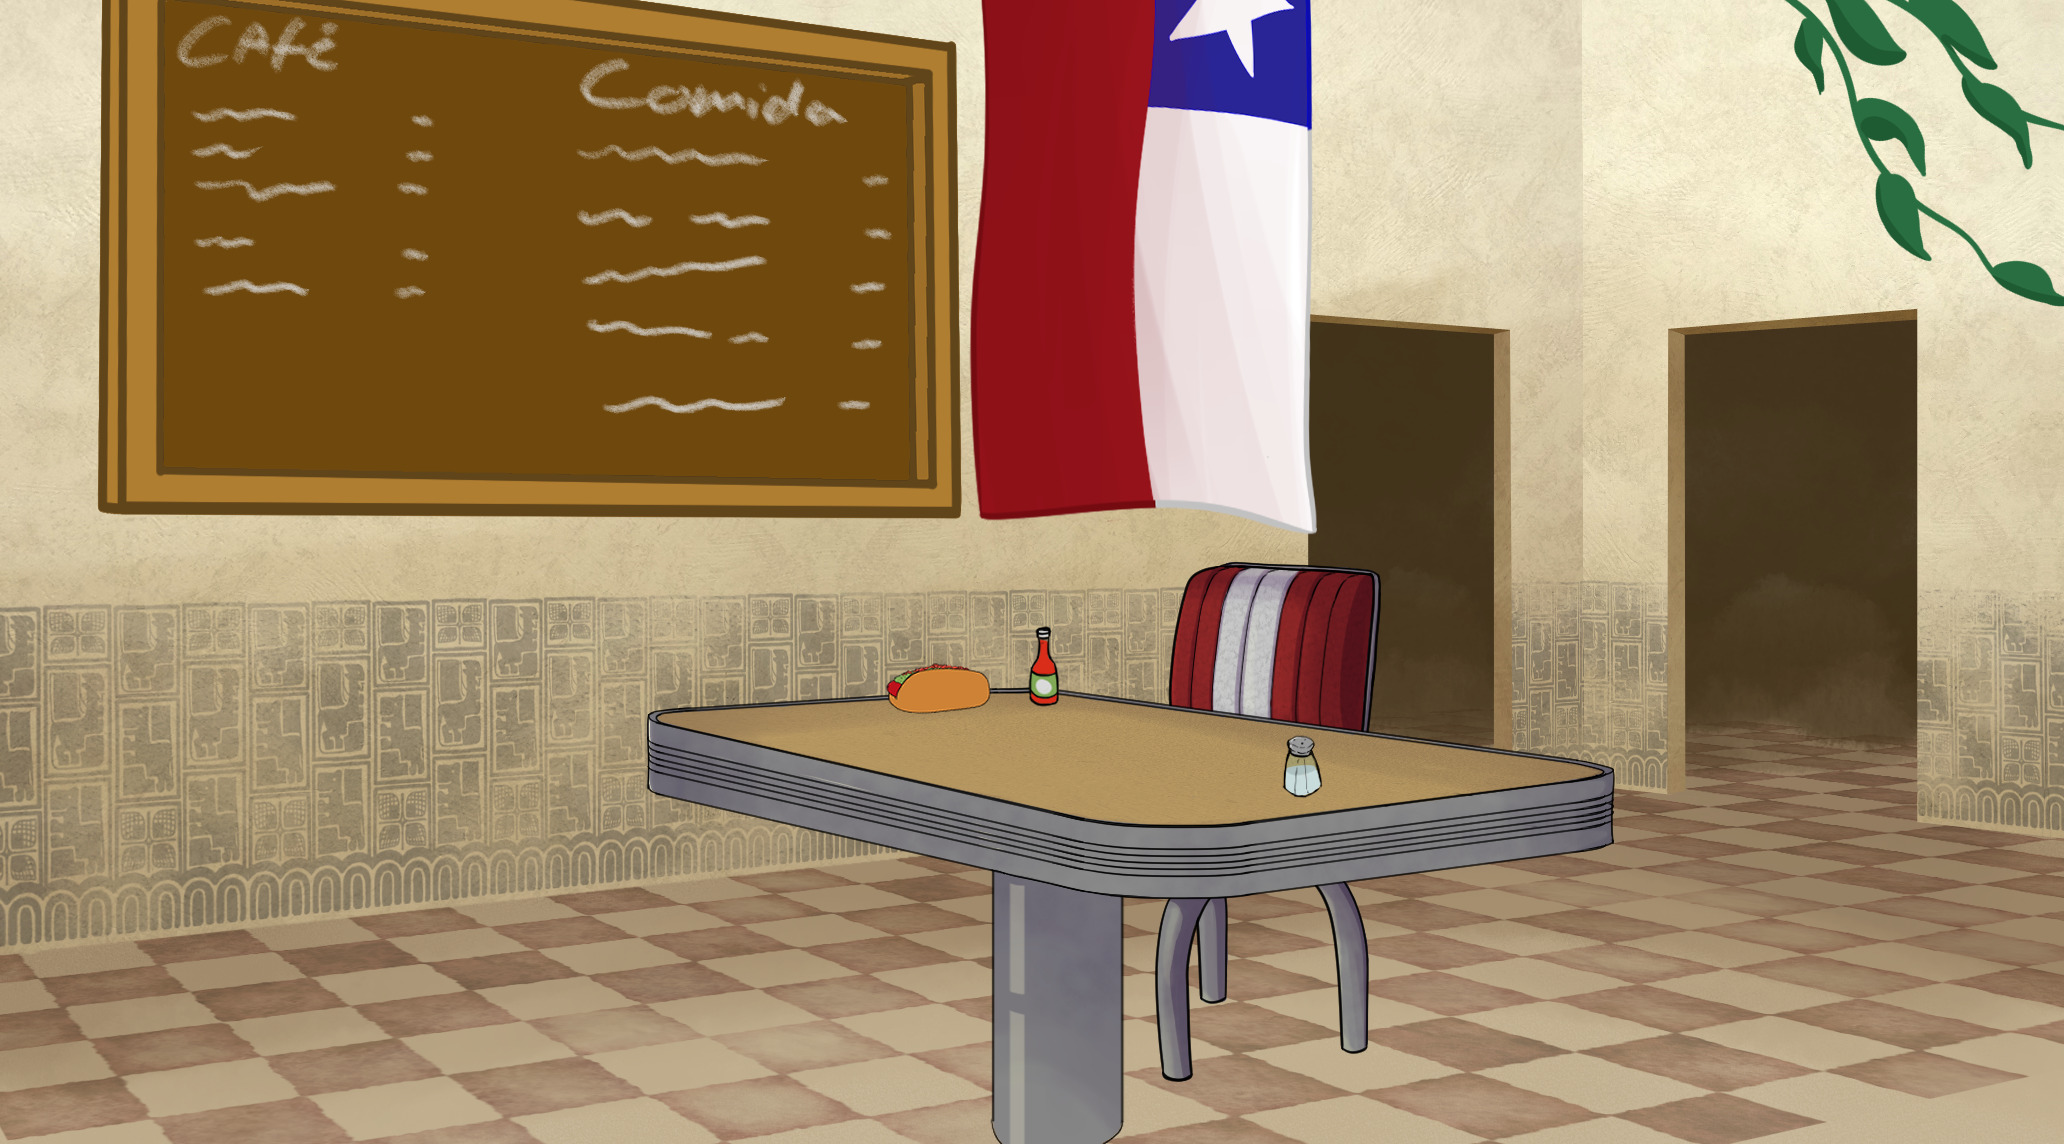 Background painting depicting a Chilean restaurant by Emilia Frederiksen.